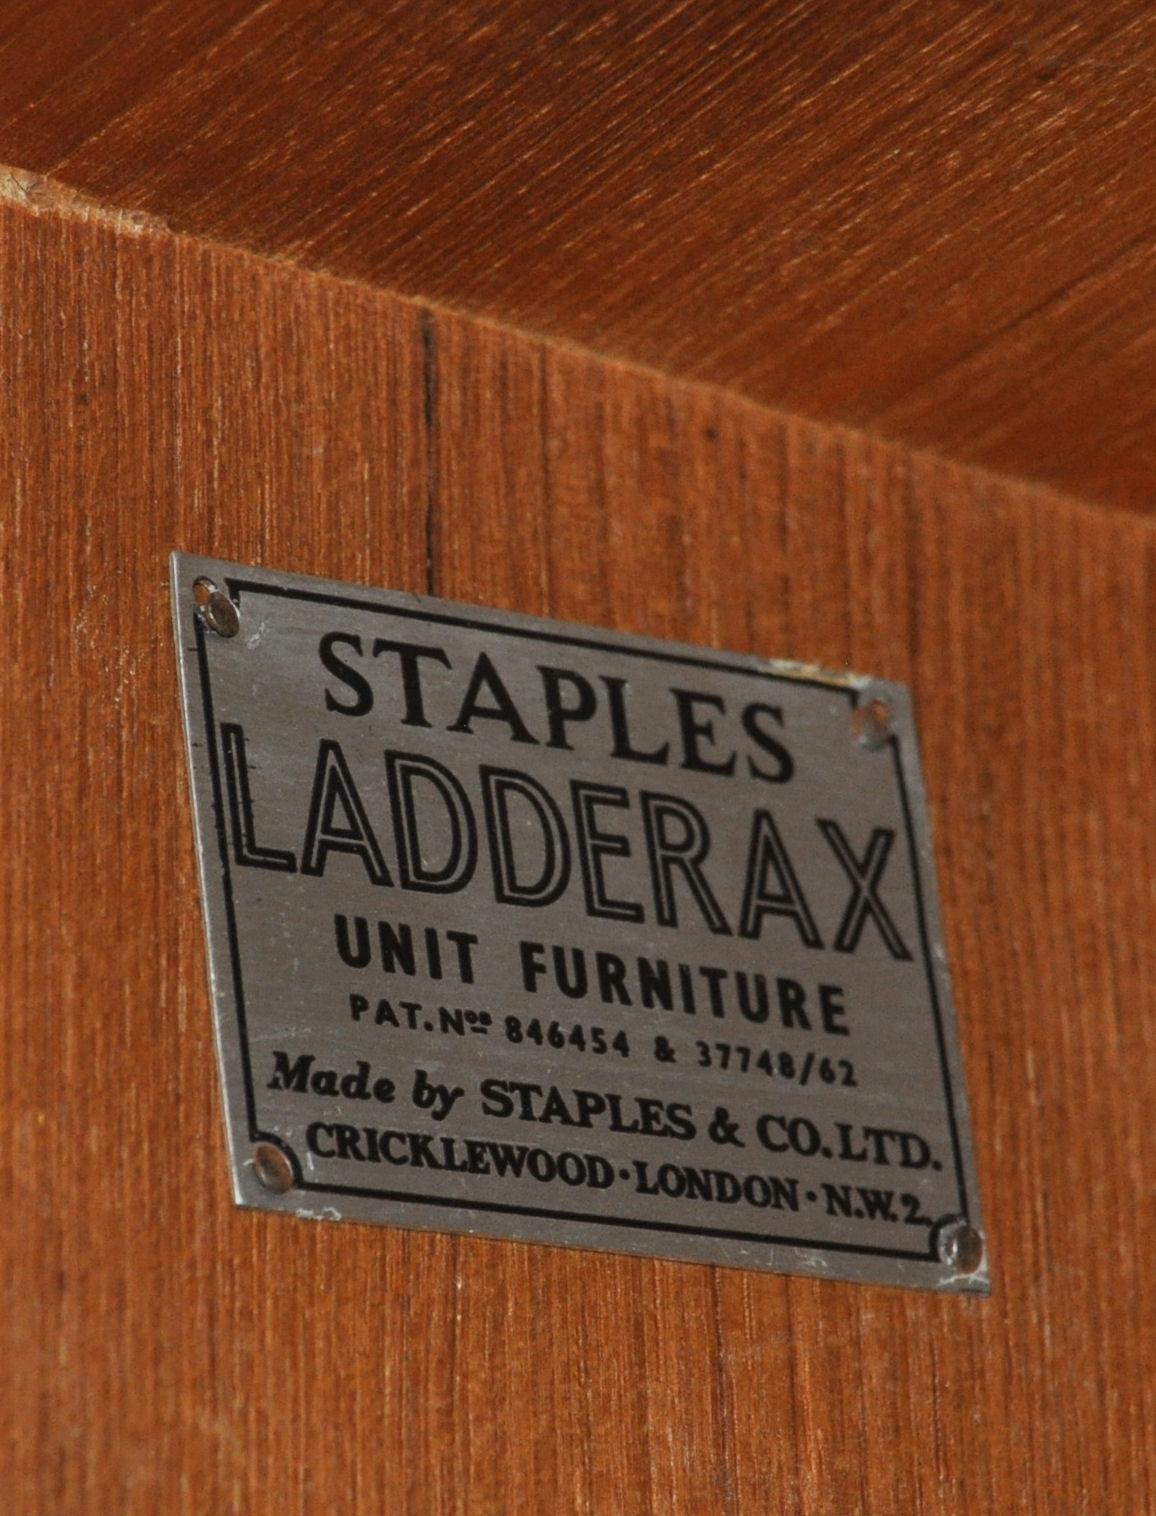 ROBERT HEAL FOR STAPLES MID CENTURY 3 BAY LADDERAX SYSTEM - Image 7 of 7